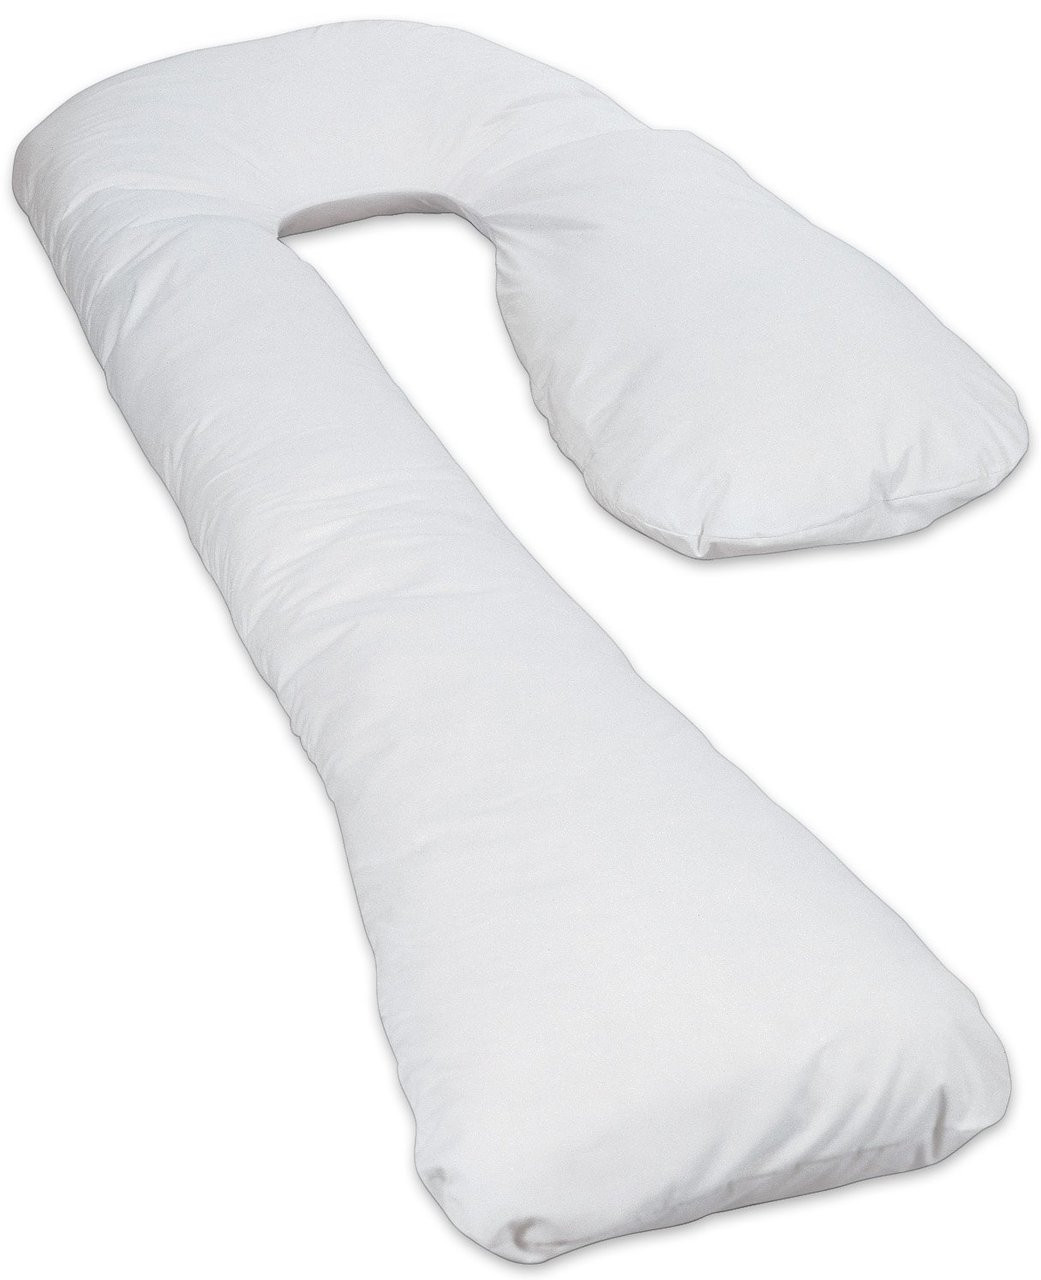 leachco all nighter total body pillow